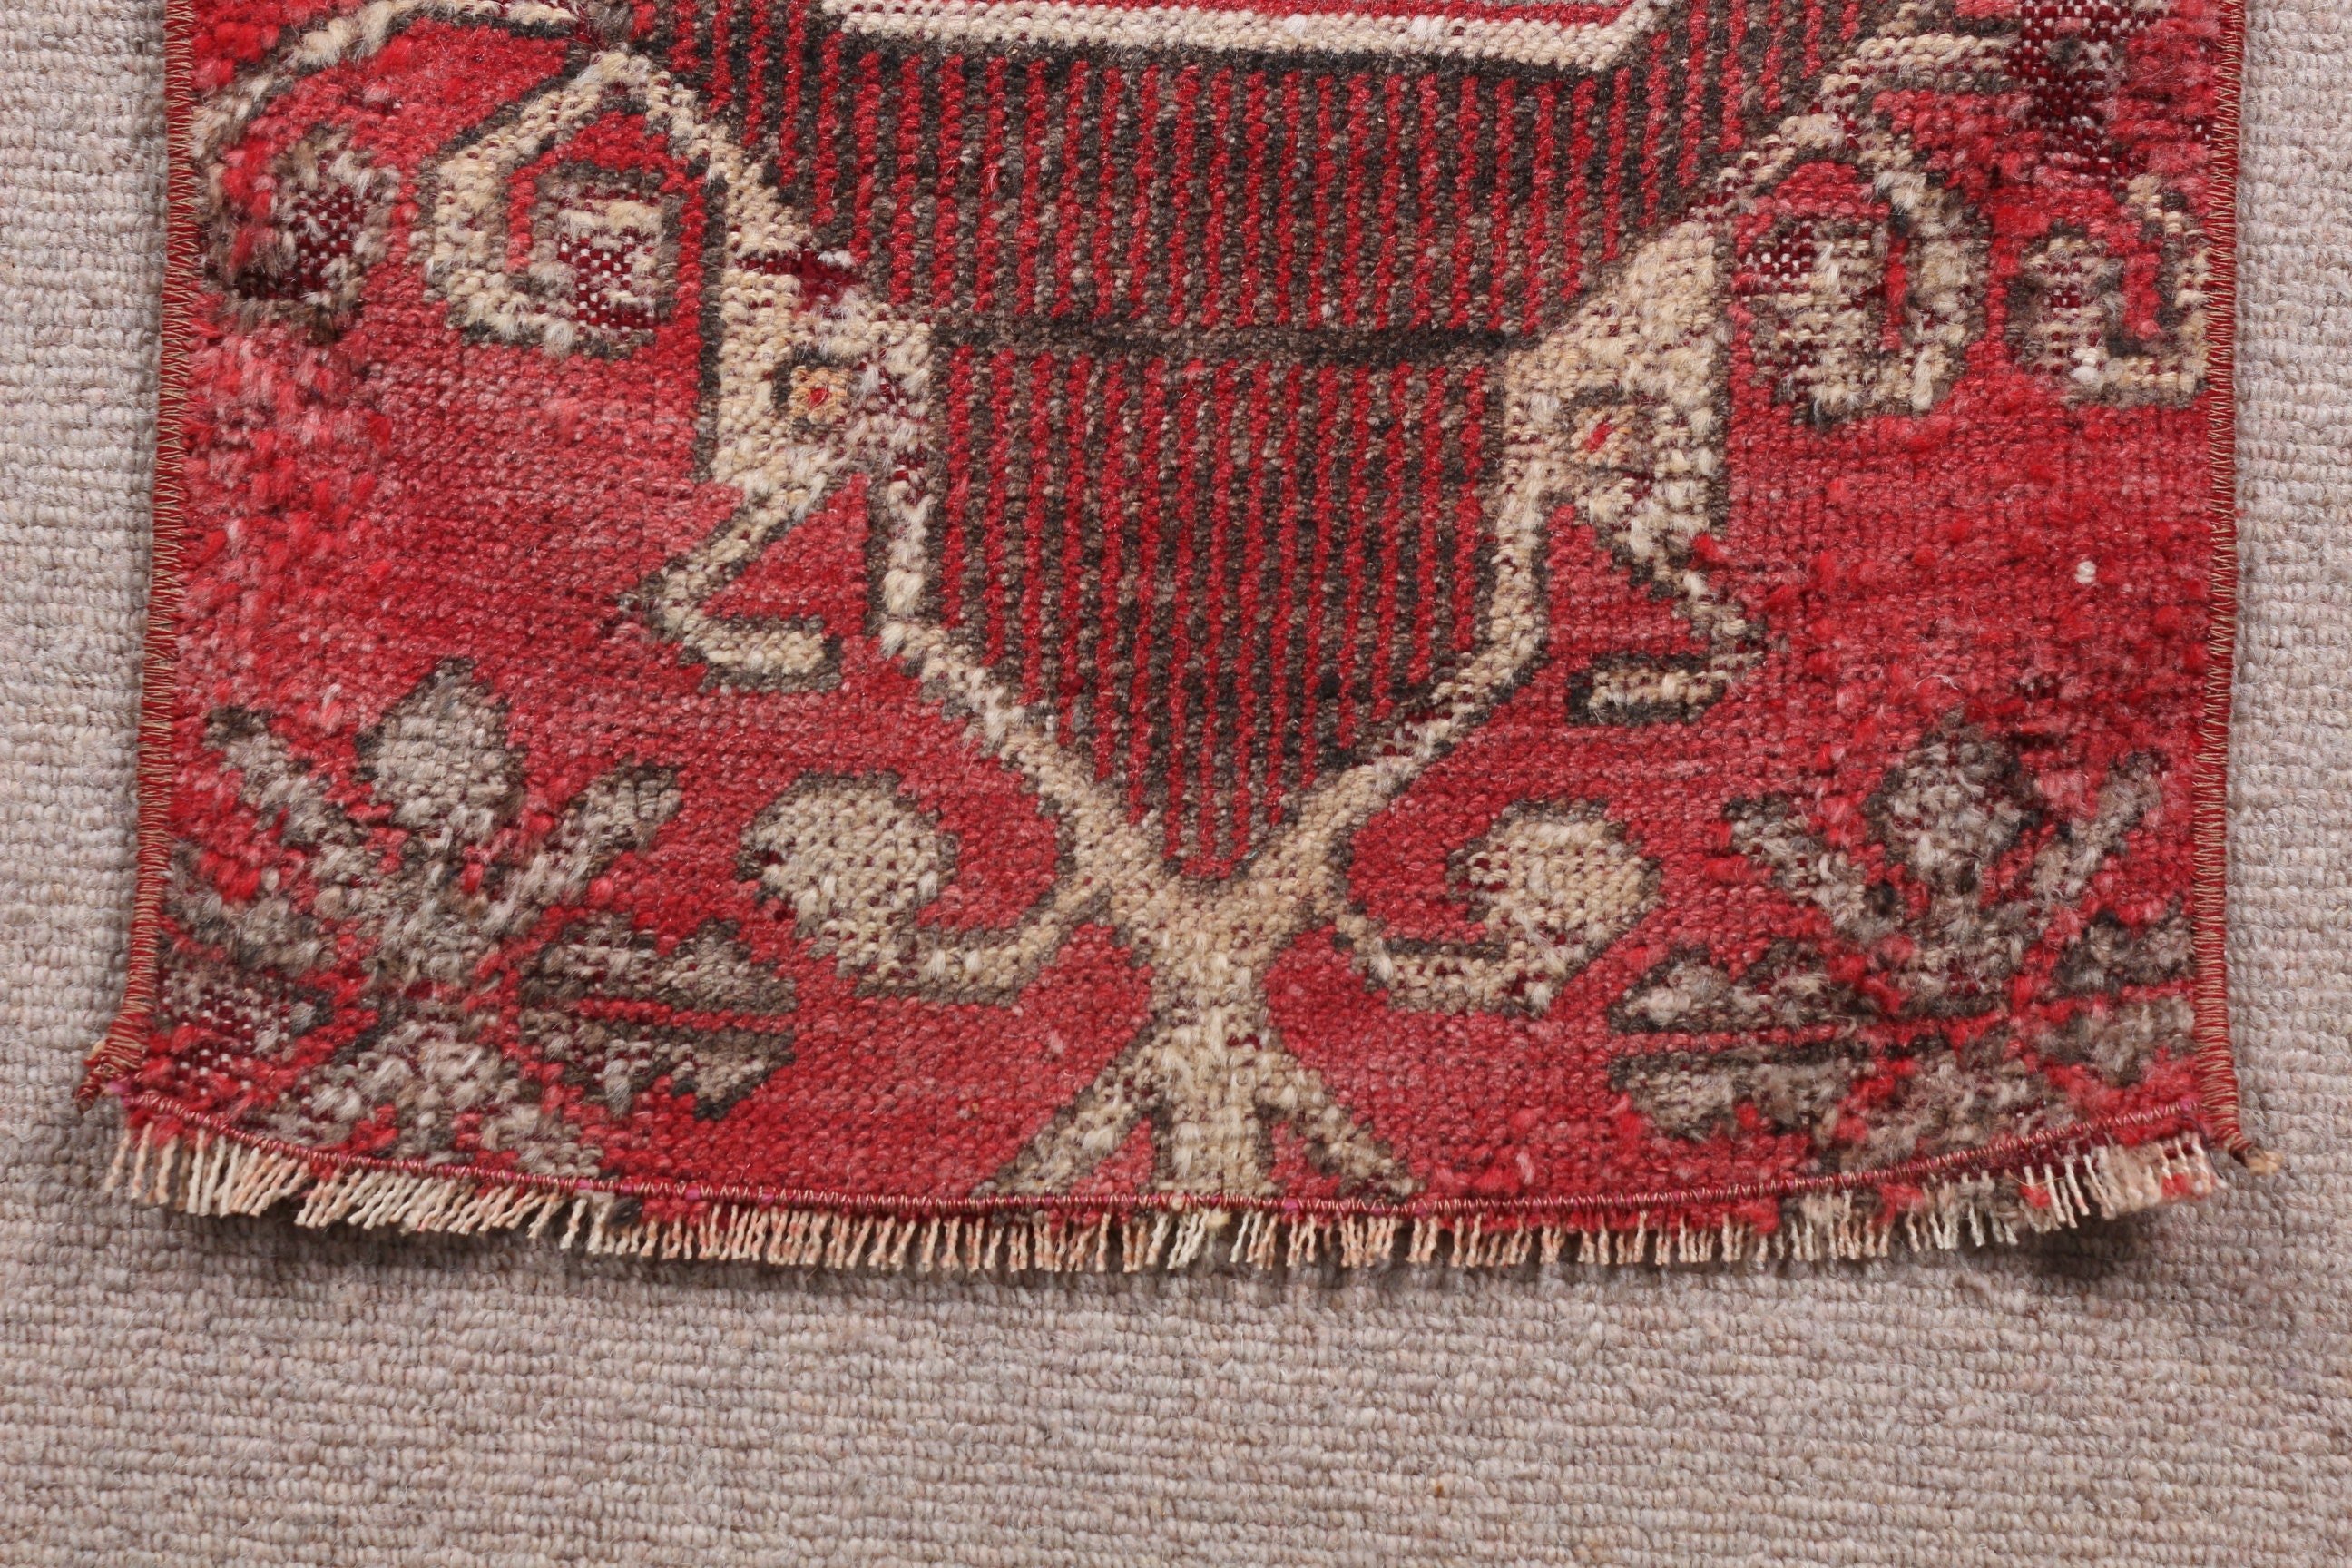 Rugs for Entry, Anatolian Rug, Nursery Rugs, Vintage Rugs, Turkish Rugs, 1.3x3 ft Small Rugs, Bedroom Rug, Oushak Rugs, Red Oushak Rug